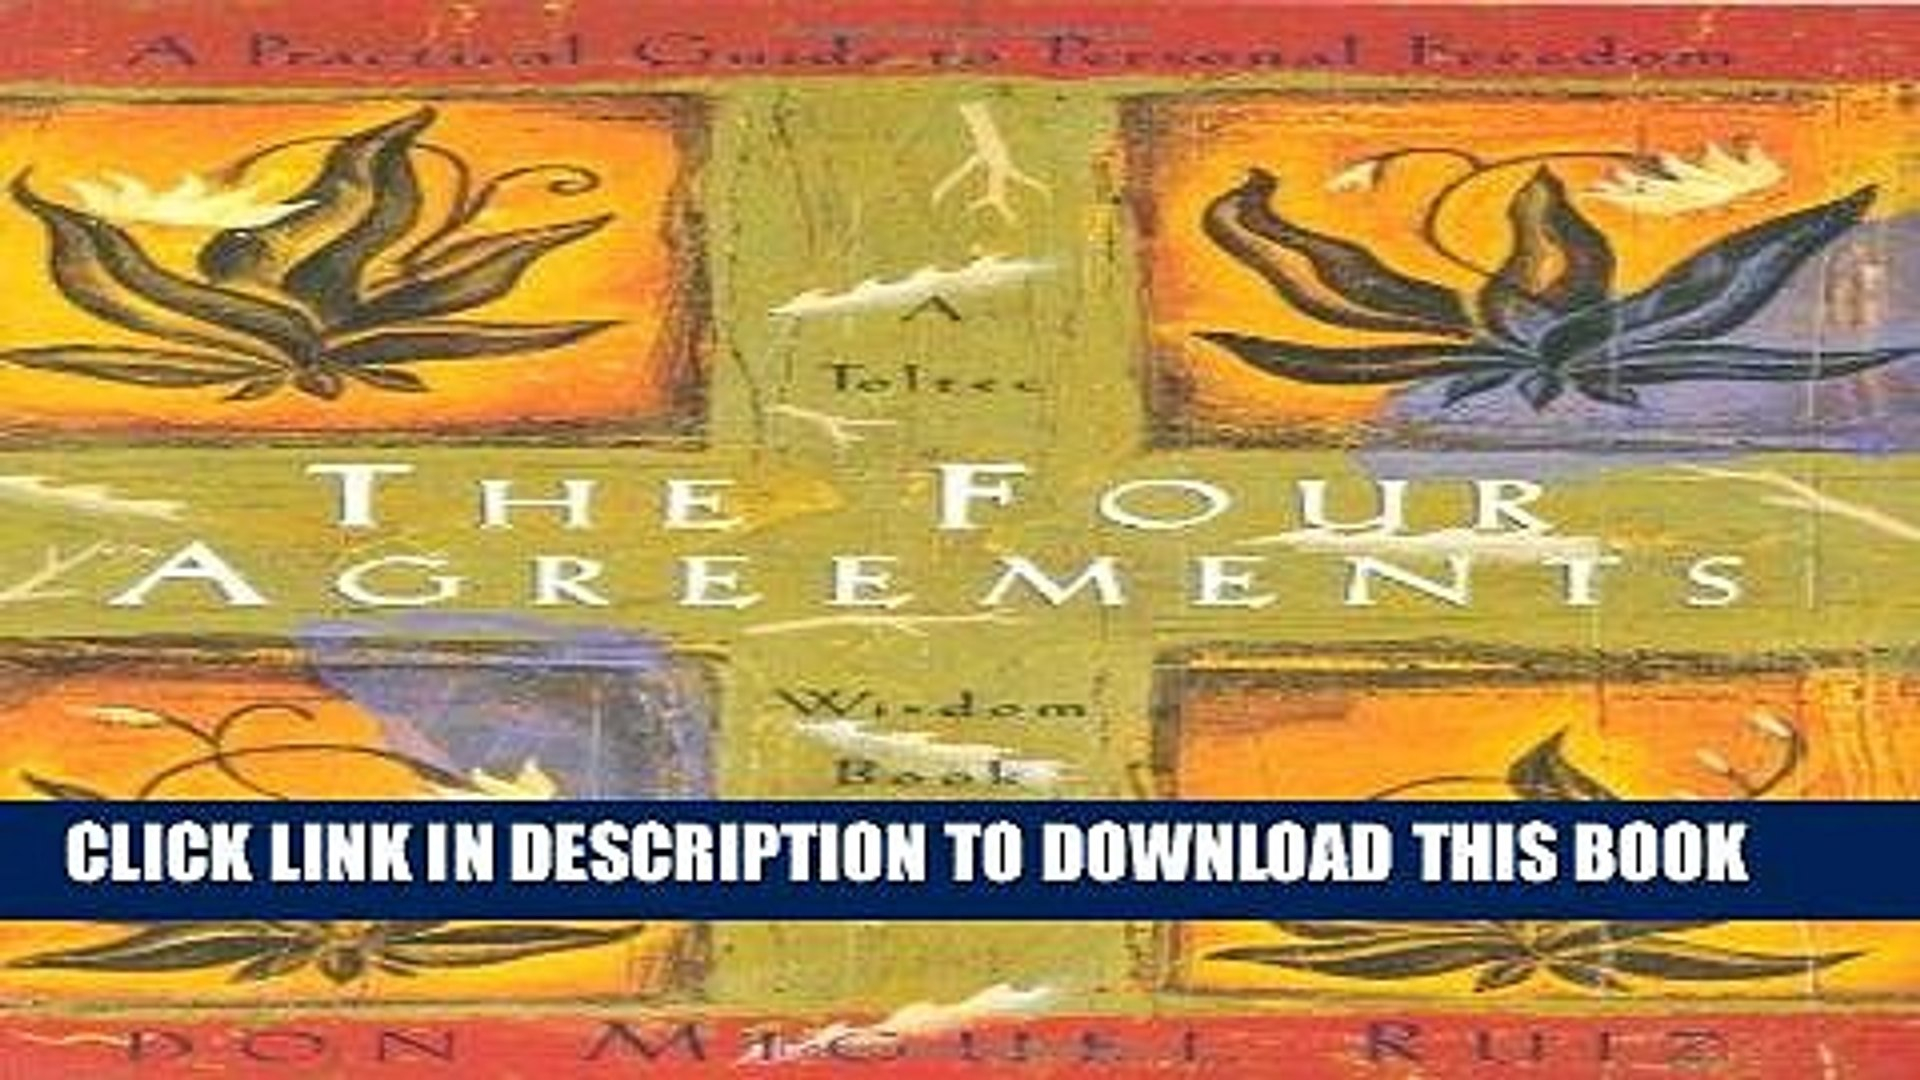 Four Agreements Book Free Download Best Seller The Four Agreements A Practical Guide To Personal Freedom A Toltec Wisdom Book Free